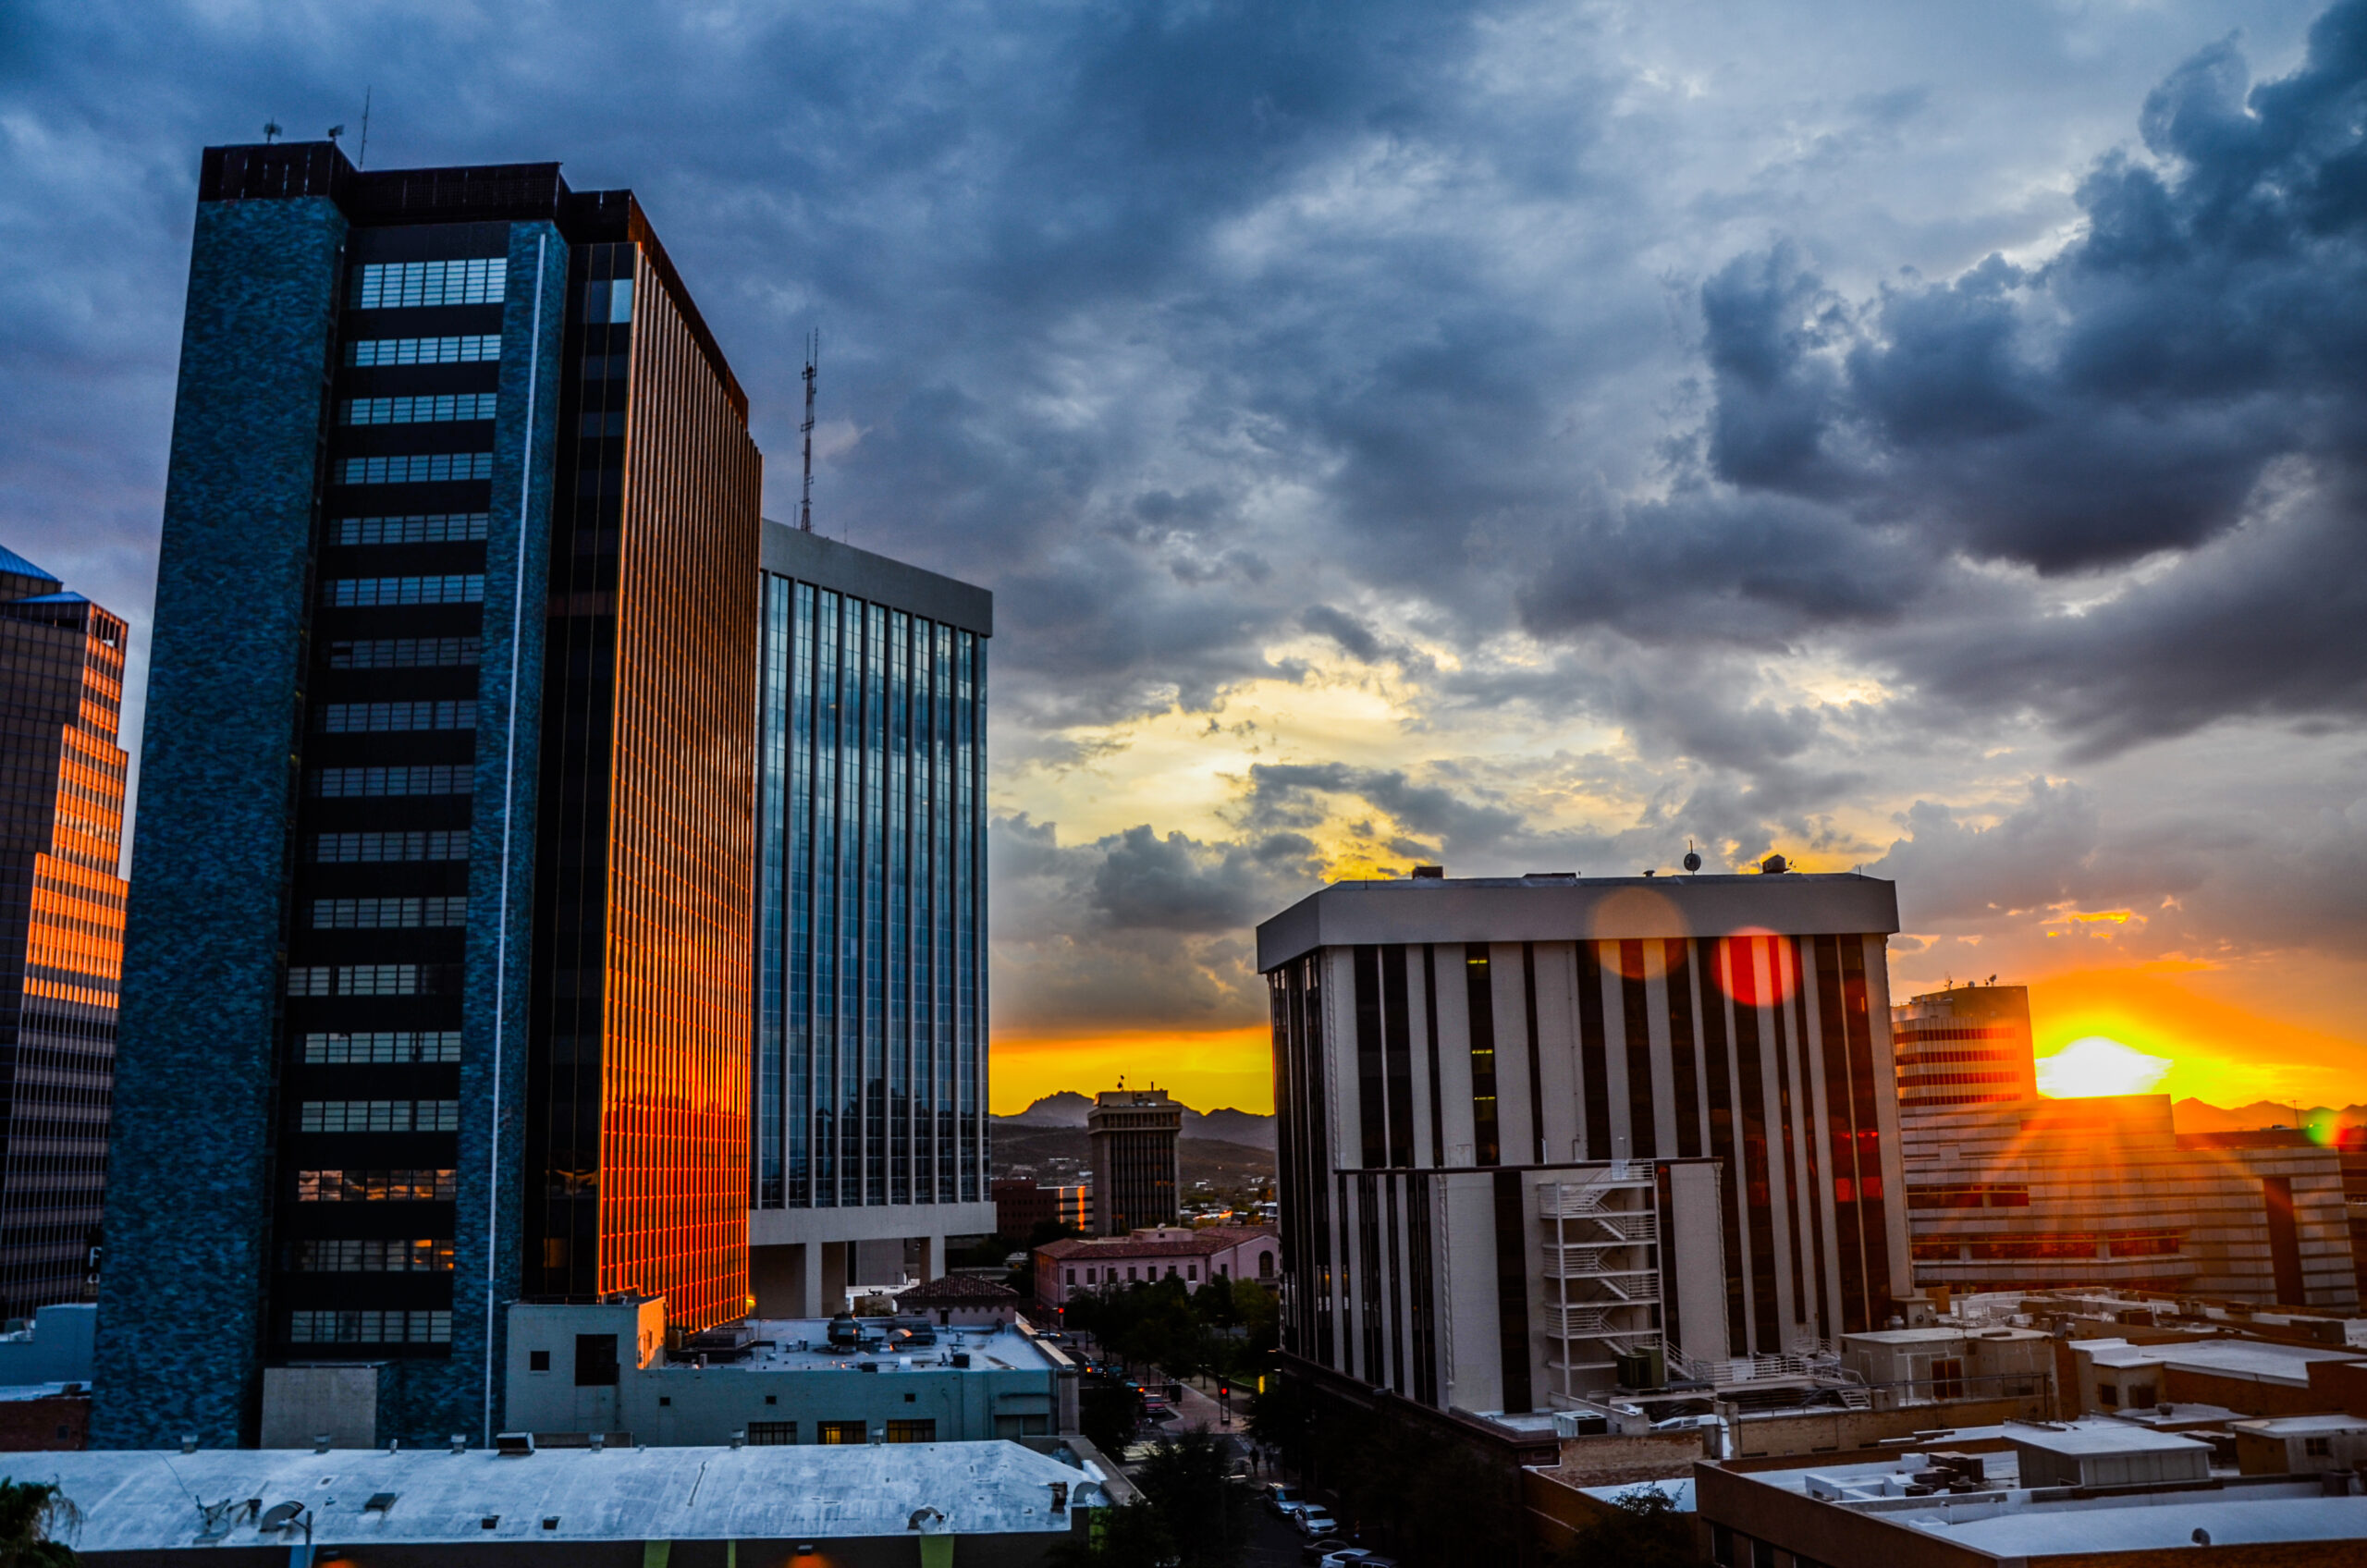 Sunset in downtown Tucson, Arizona on a cloudy day